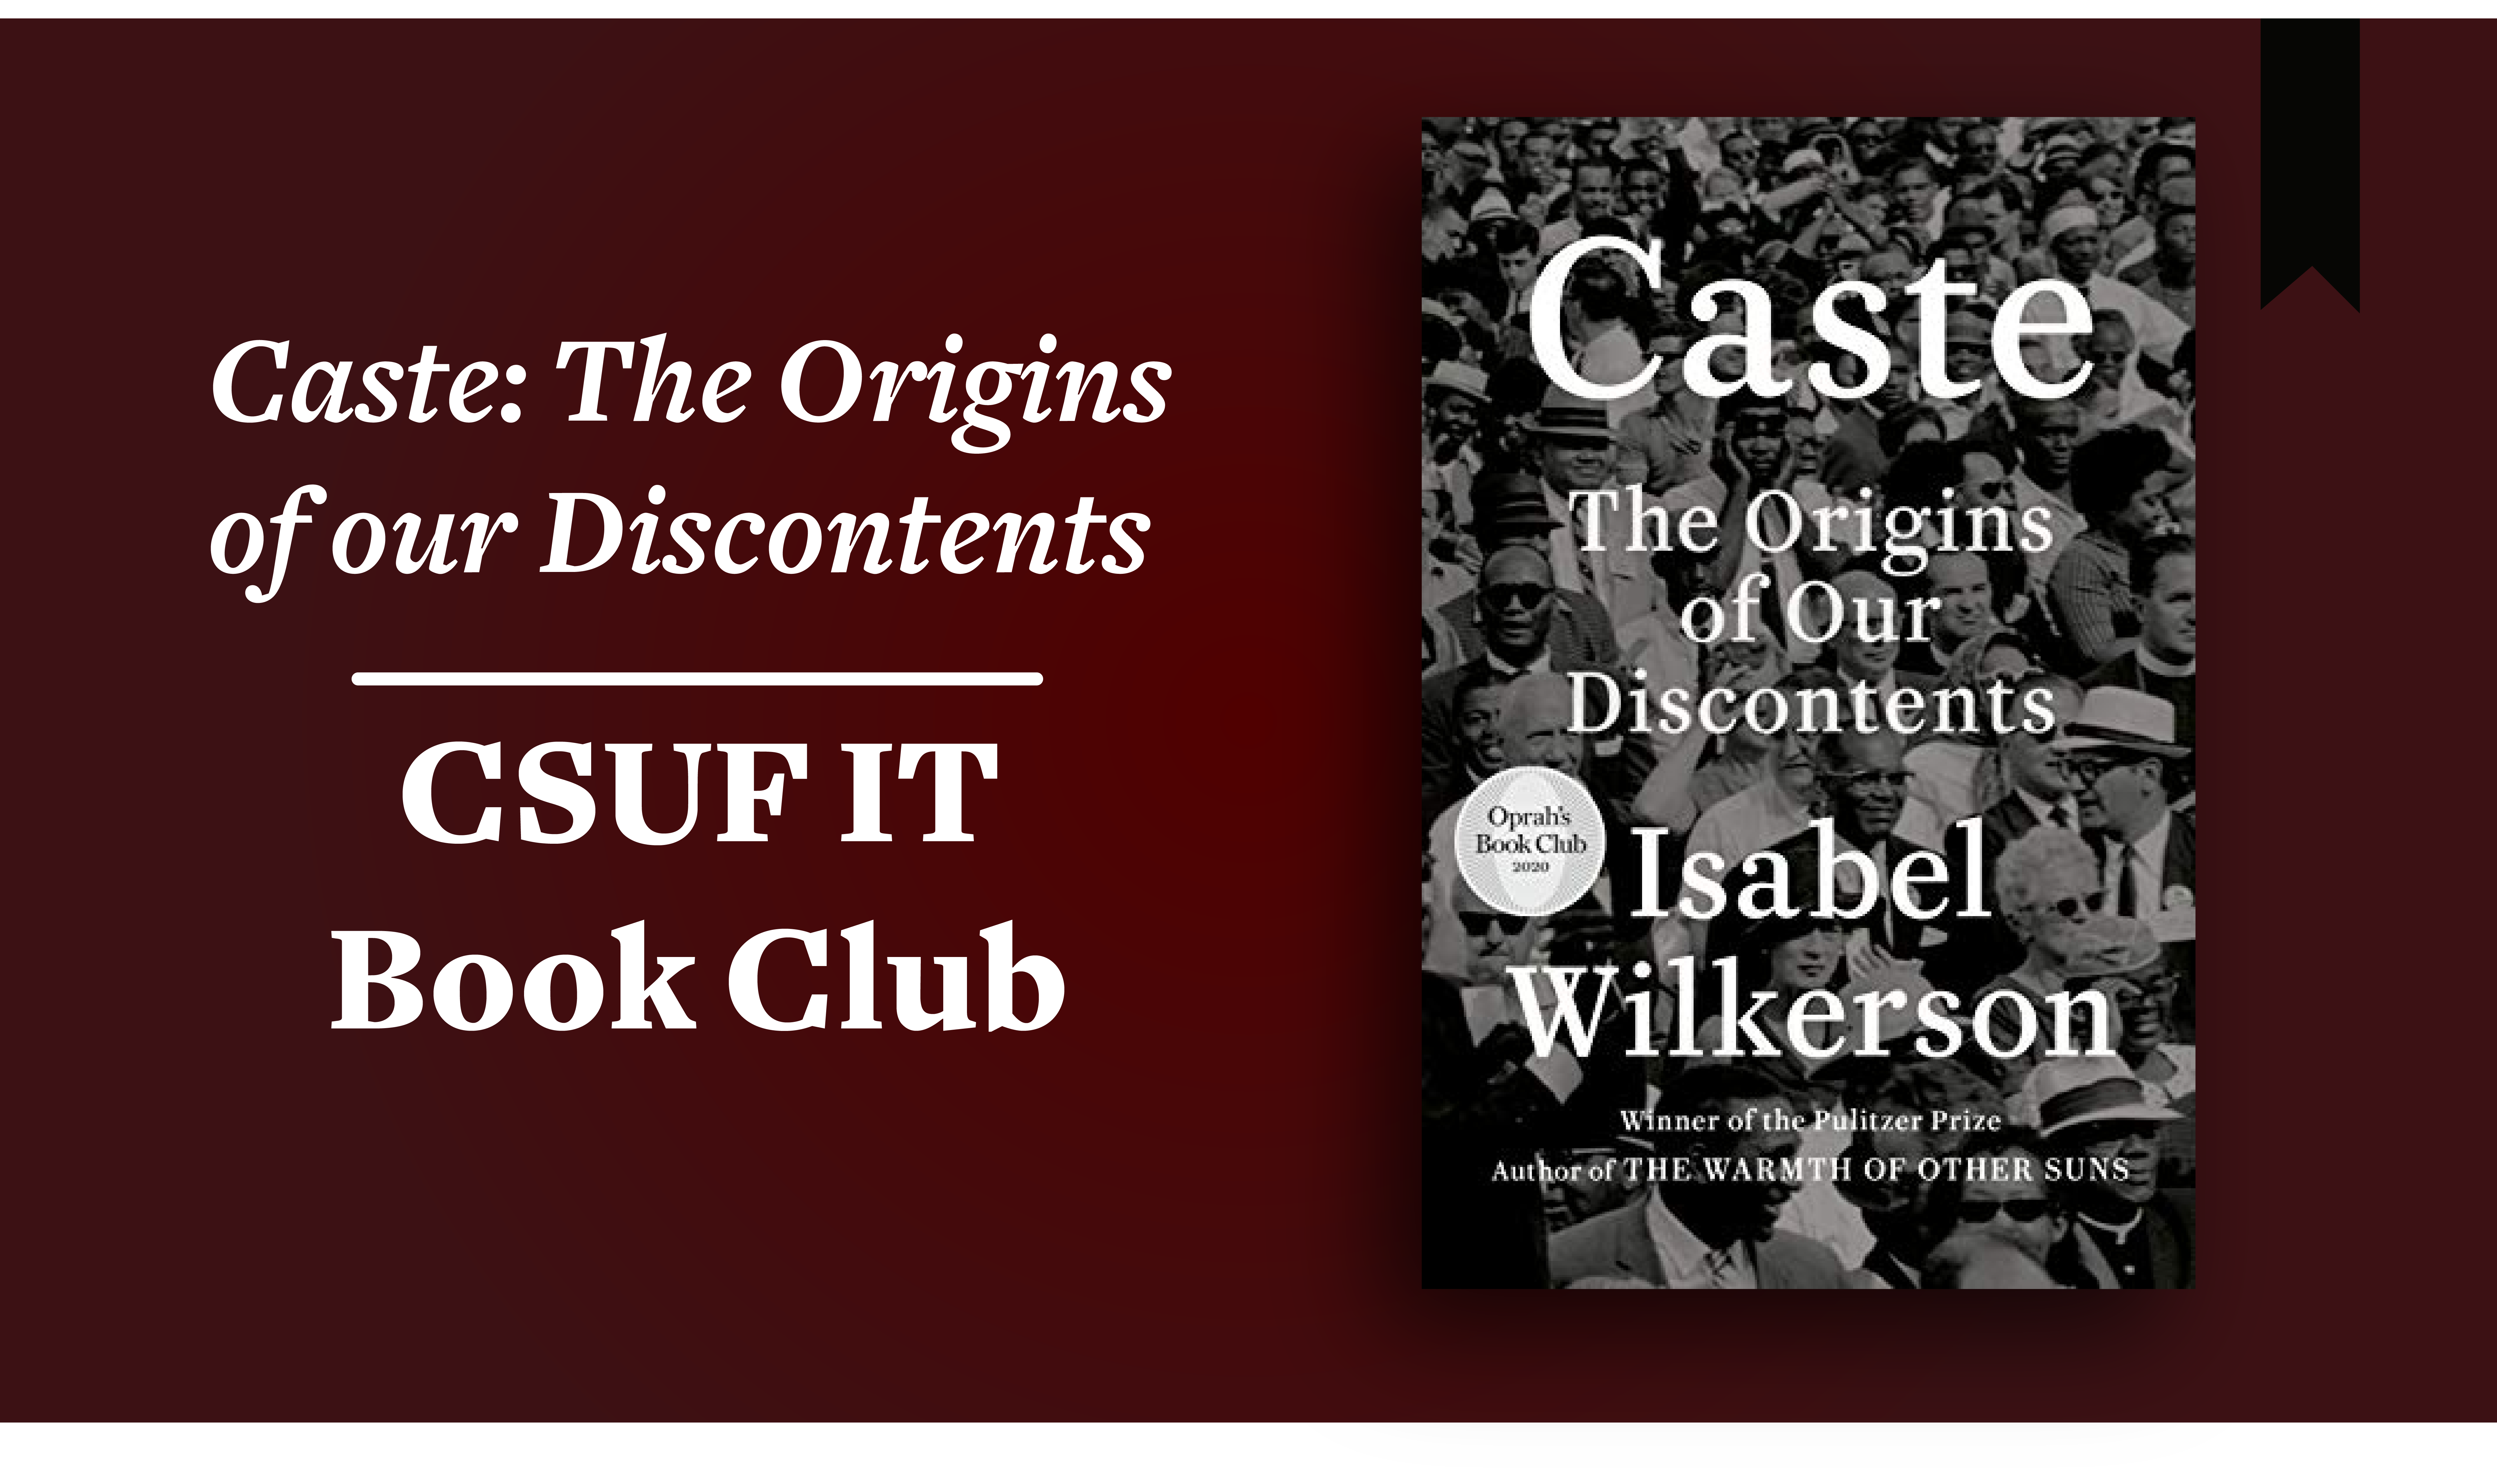 Caste: The Origins of Our Discontents CSUF IT Book Club